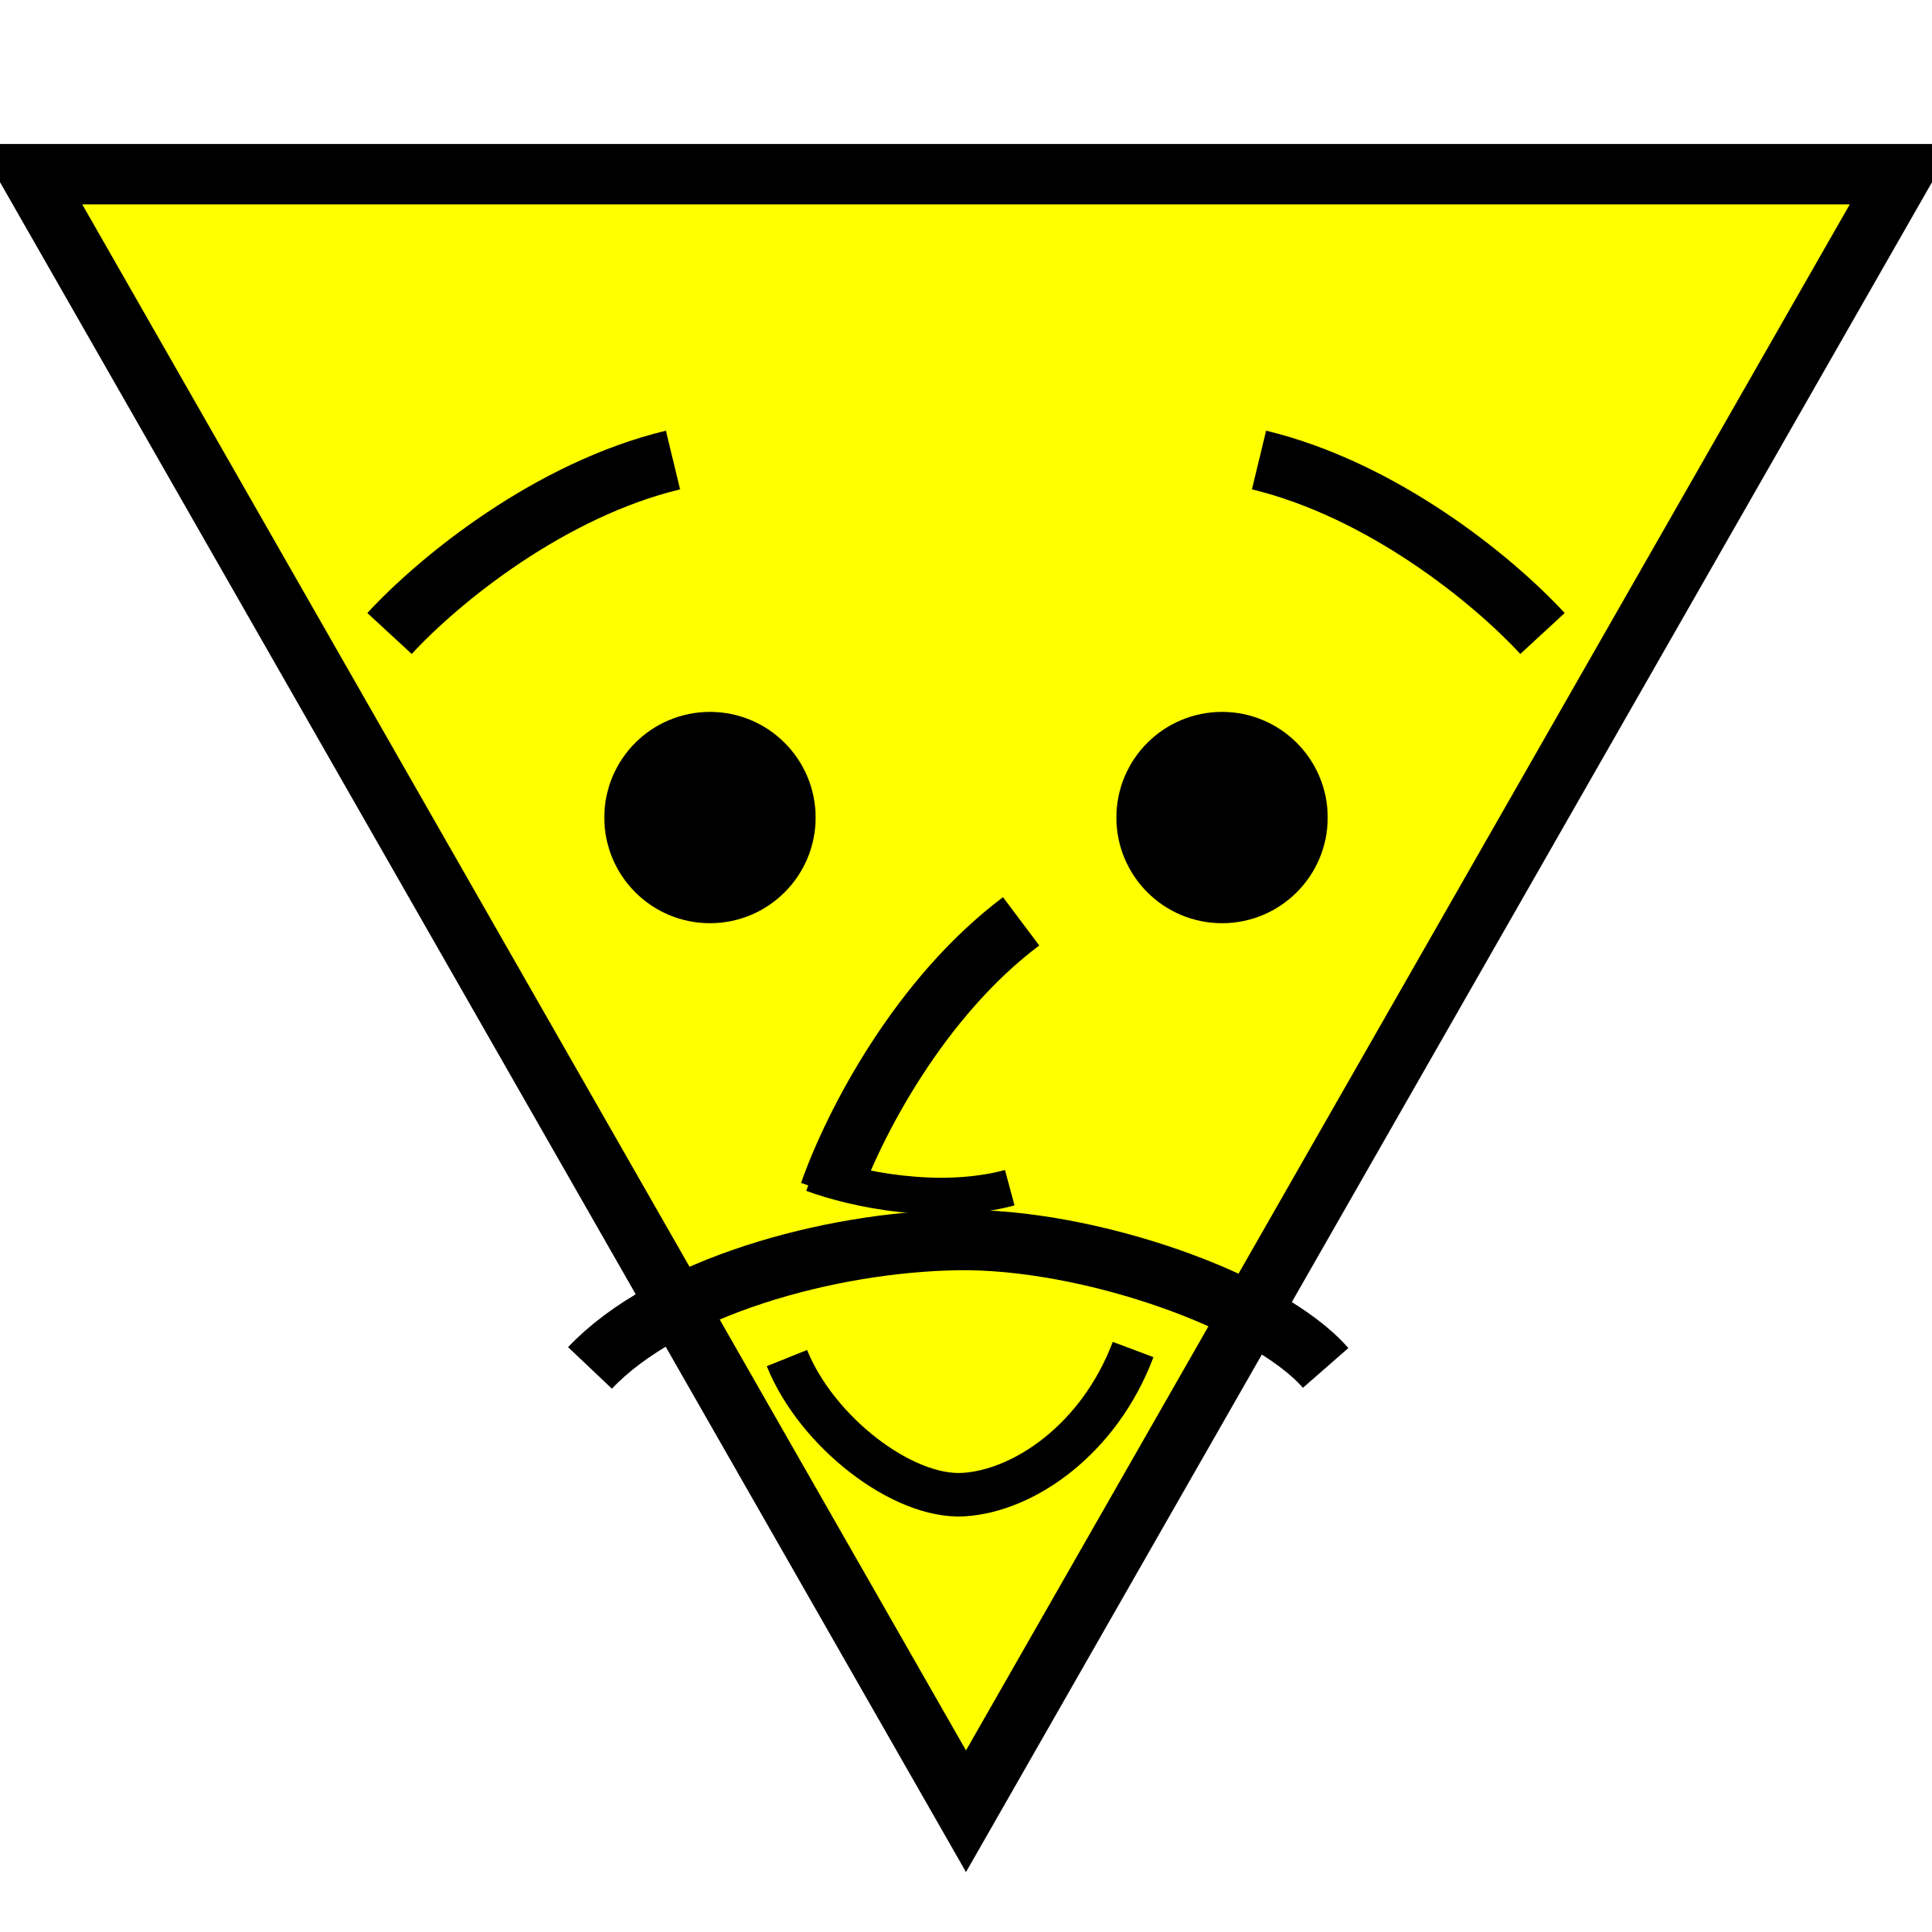 Clipart mustache yellow. Triangle face with big